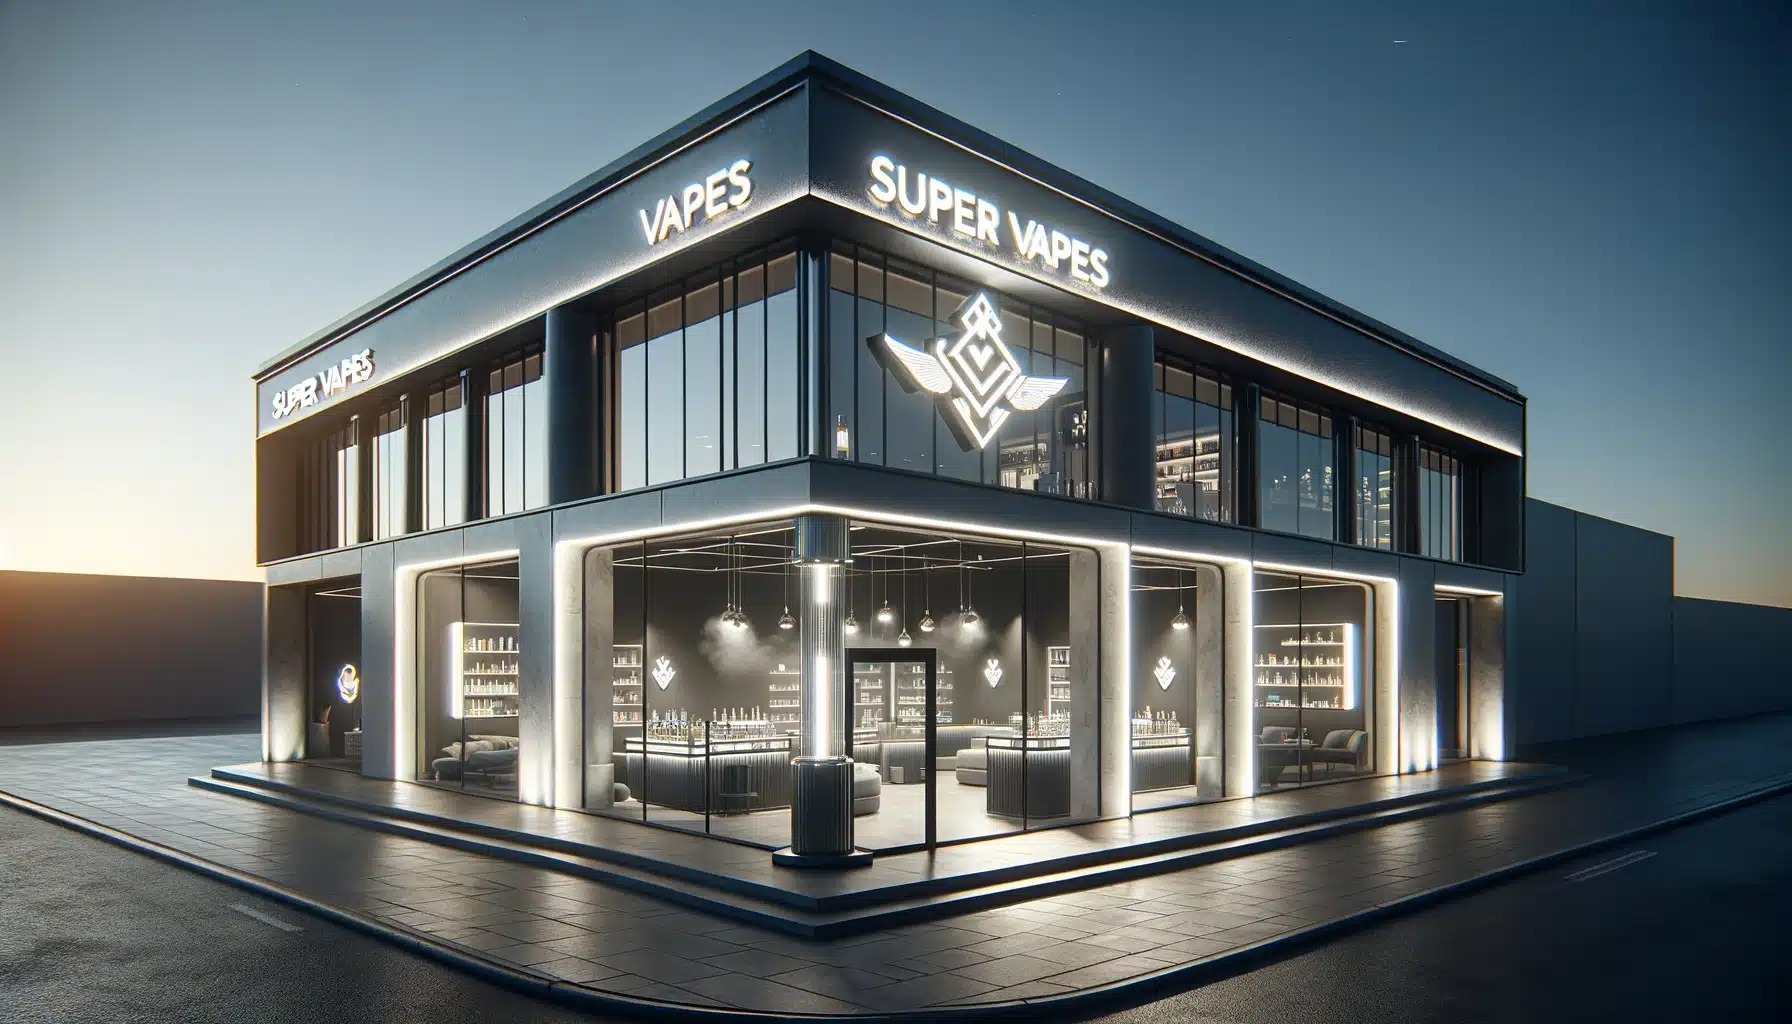 A 3d rendering of a jewelry store at dusk with Super Vapes influence.